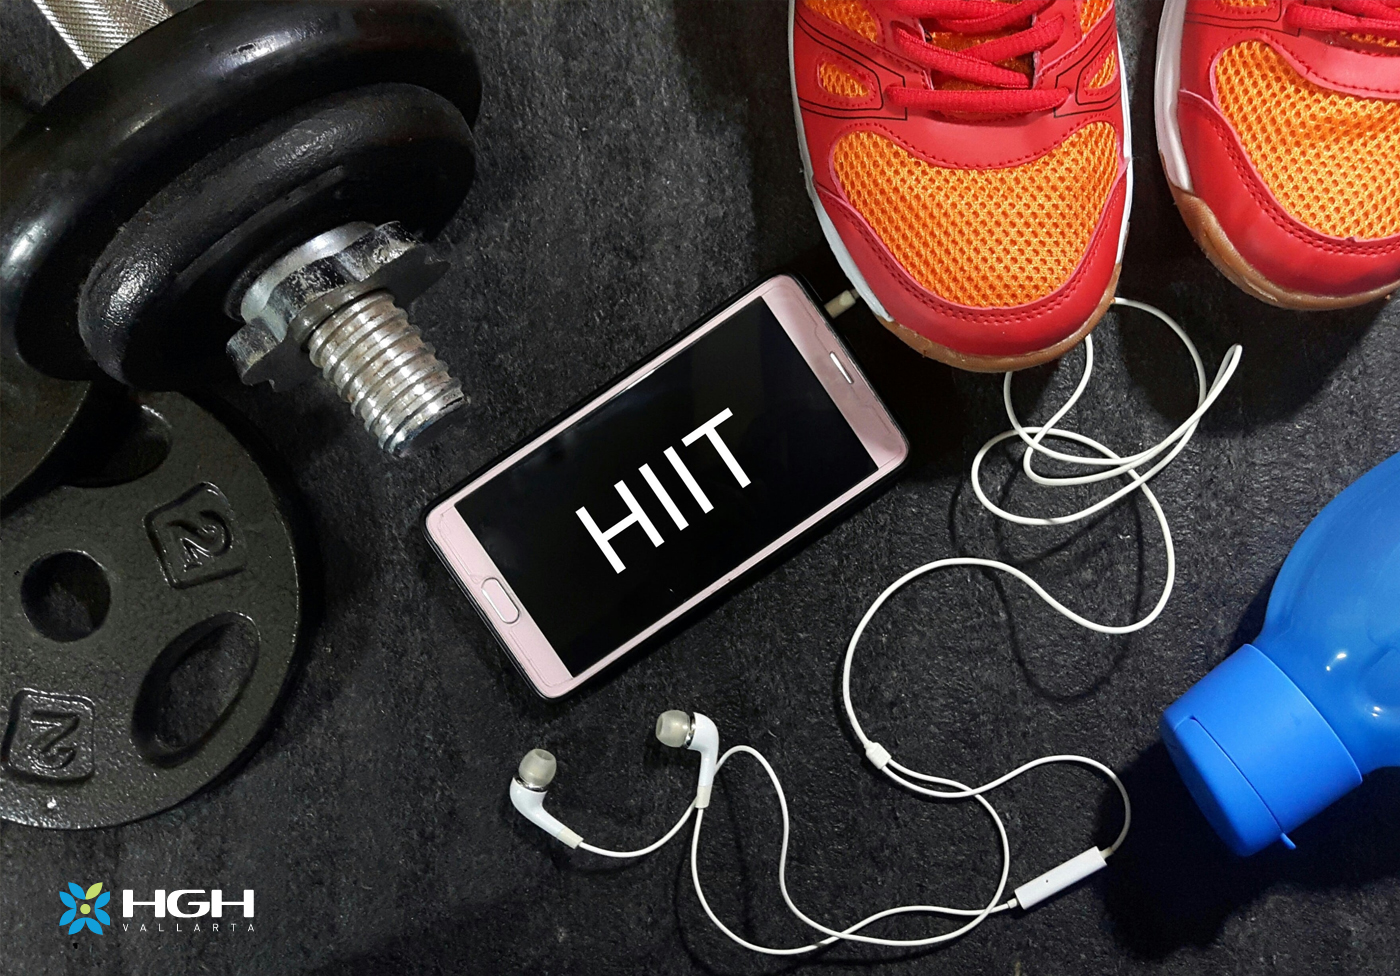 HIIT exercises can help increase hgh levels naturally